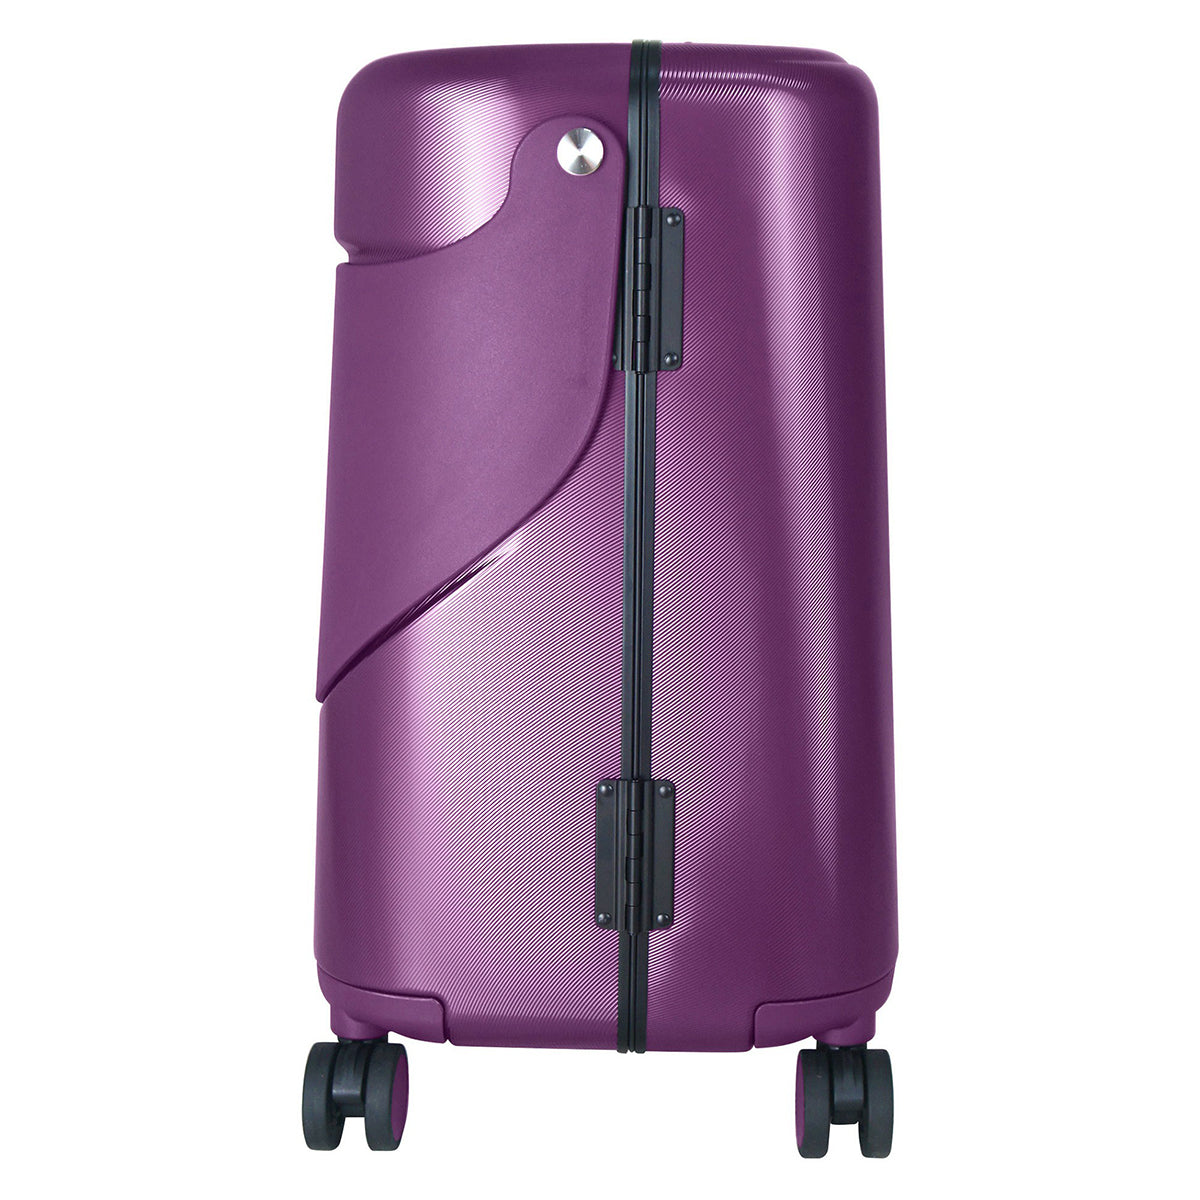 Miamily Ride-On Carry-On Luggage